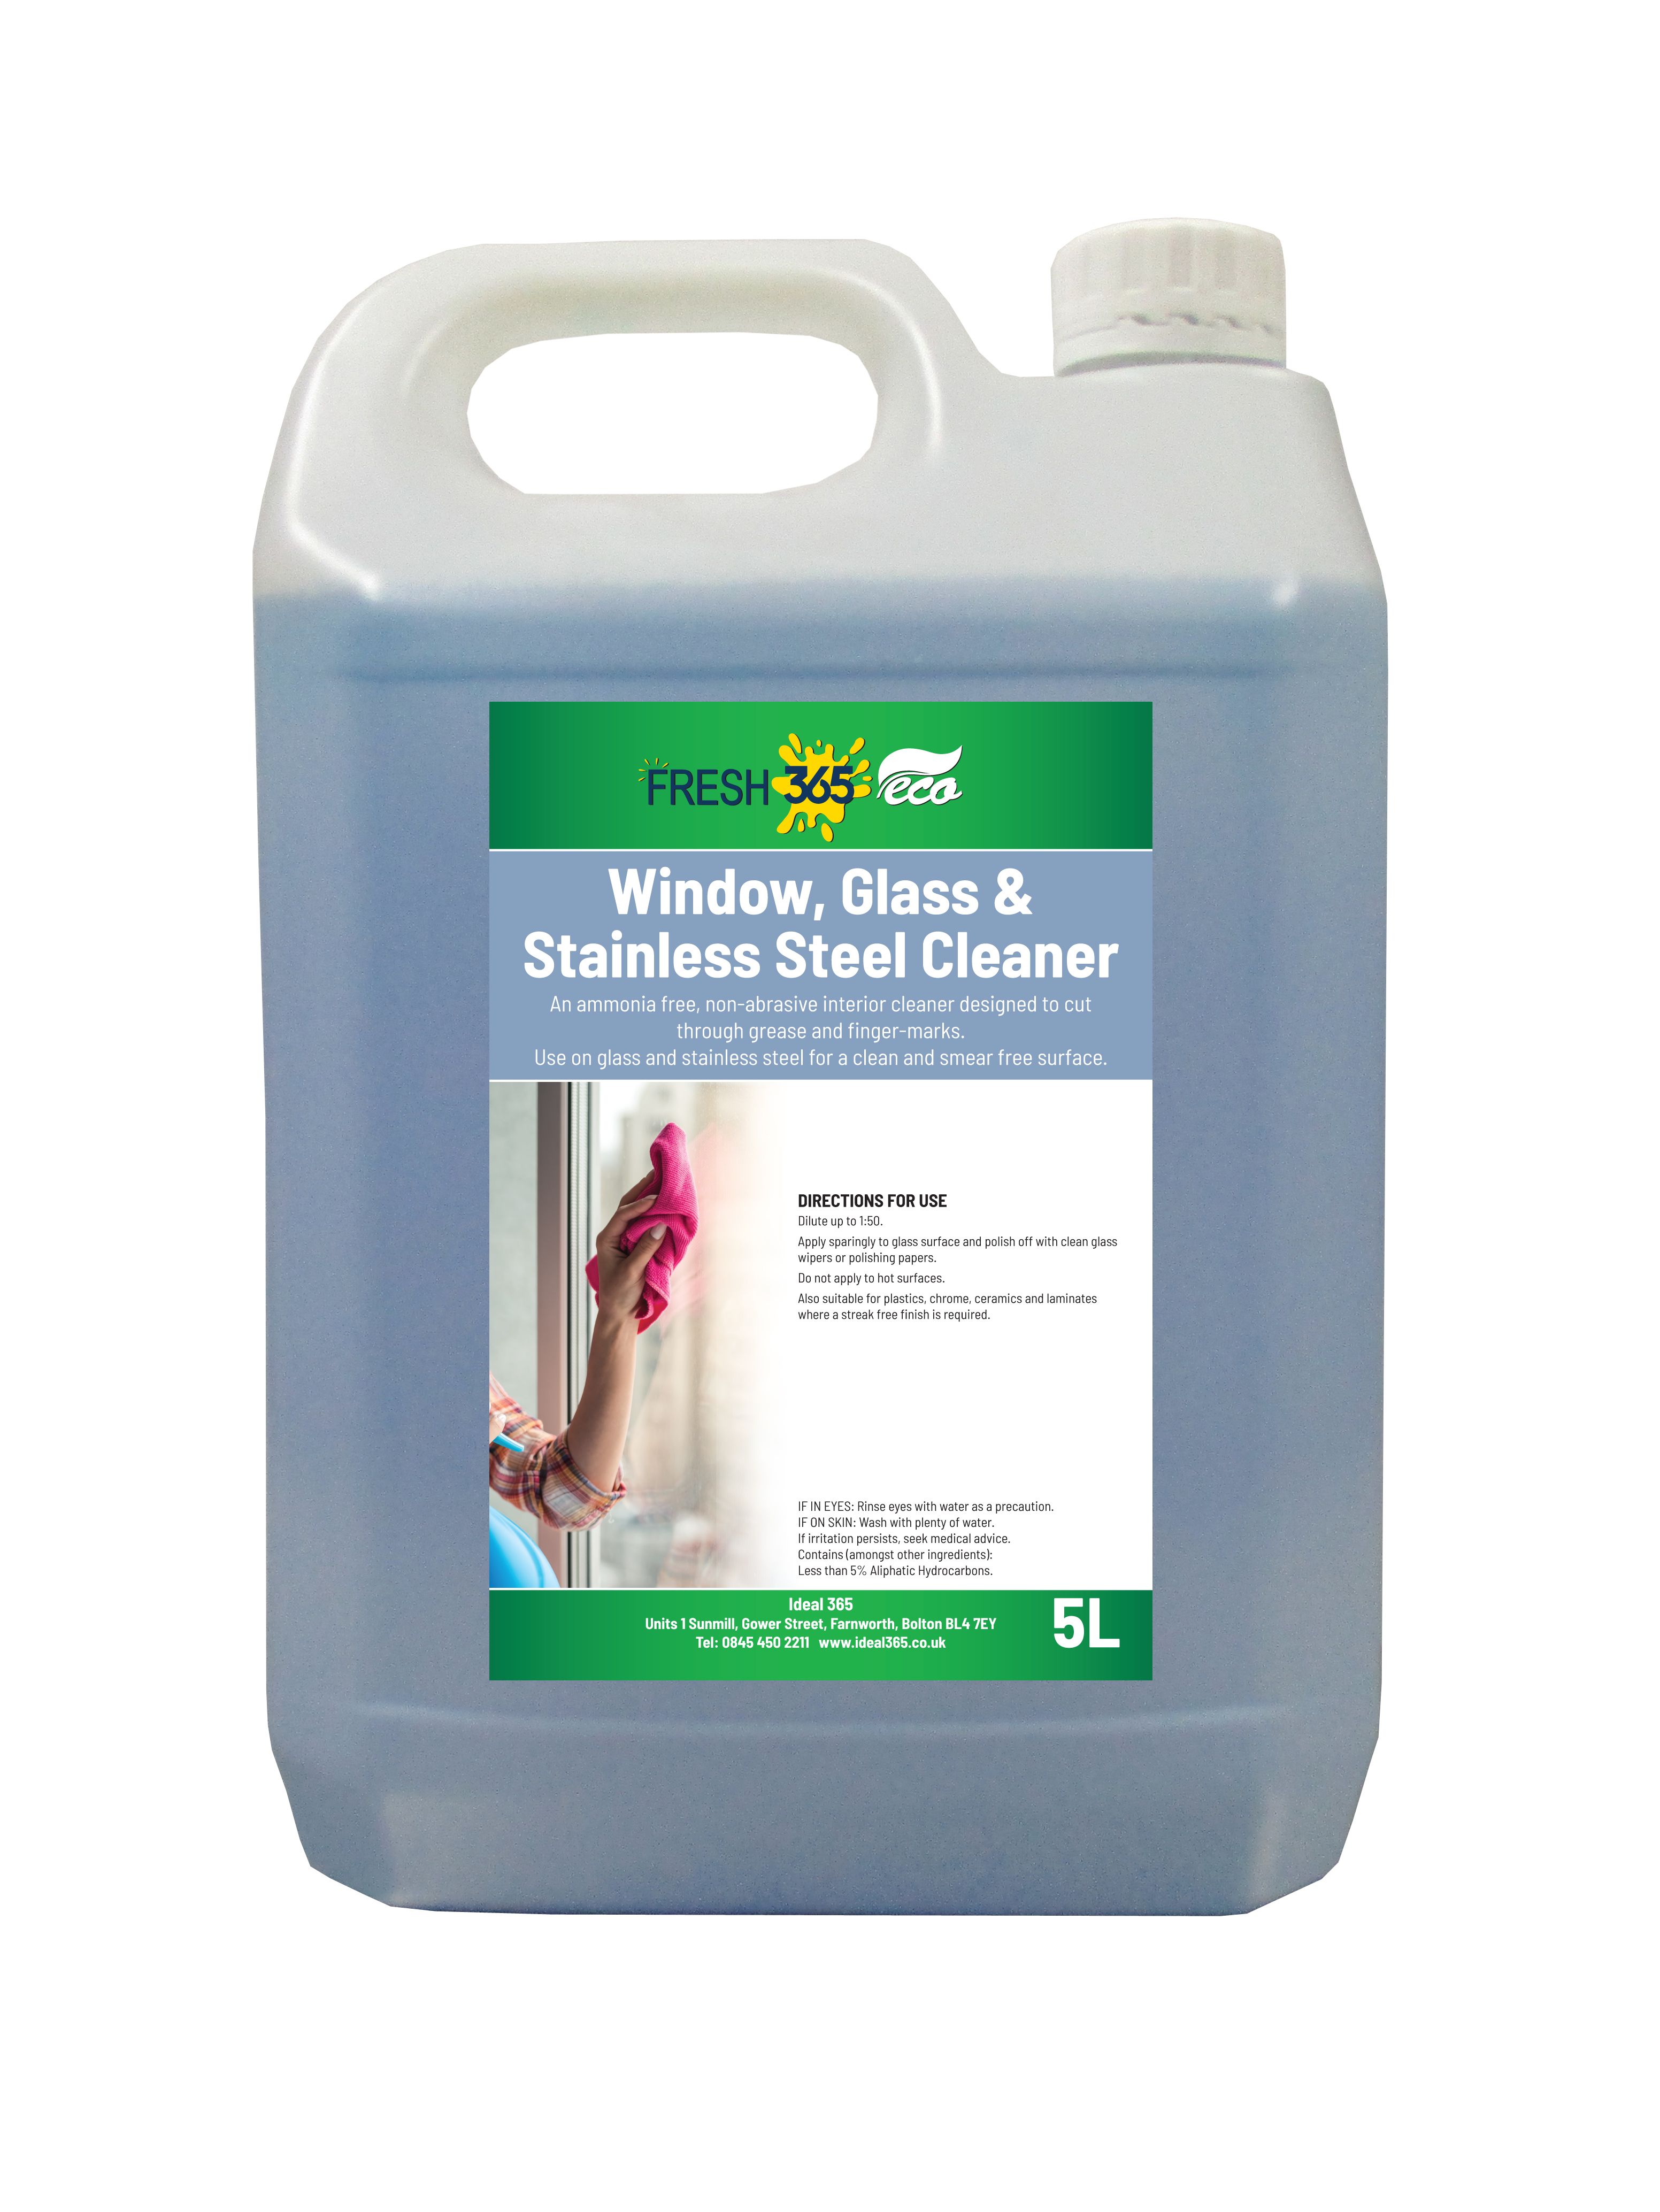 Fresh 365 window, glass & stainless steel cleaner 5 litre